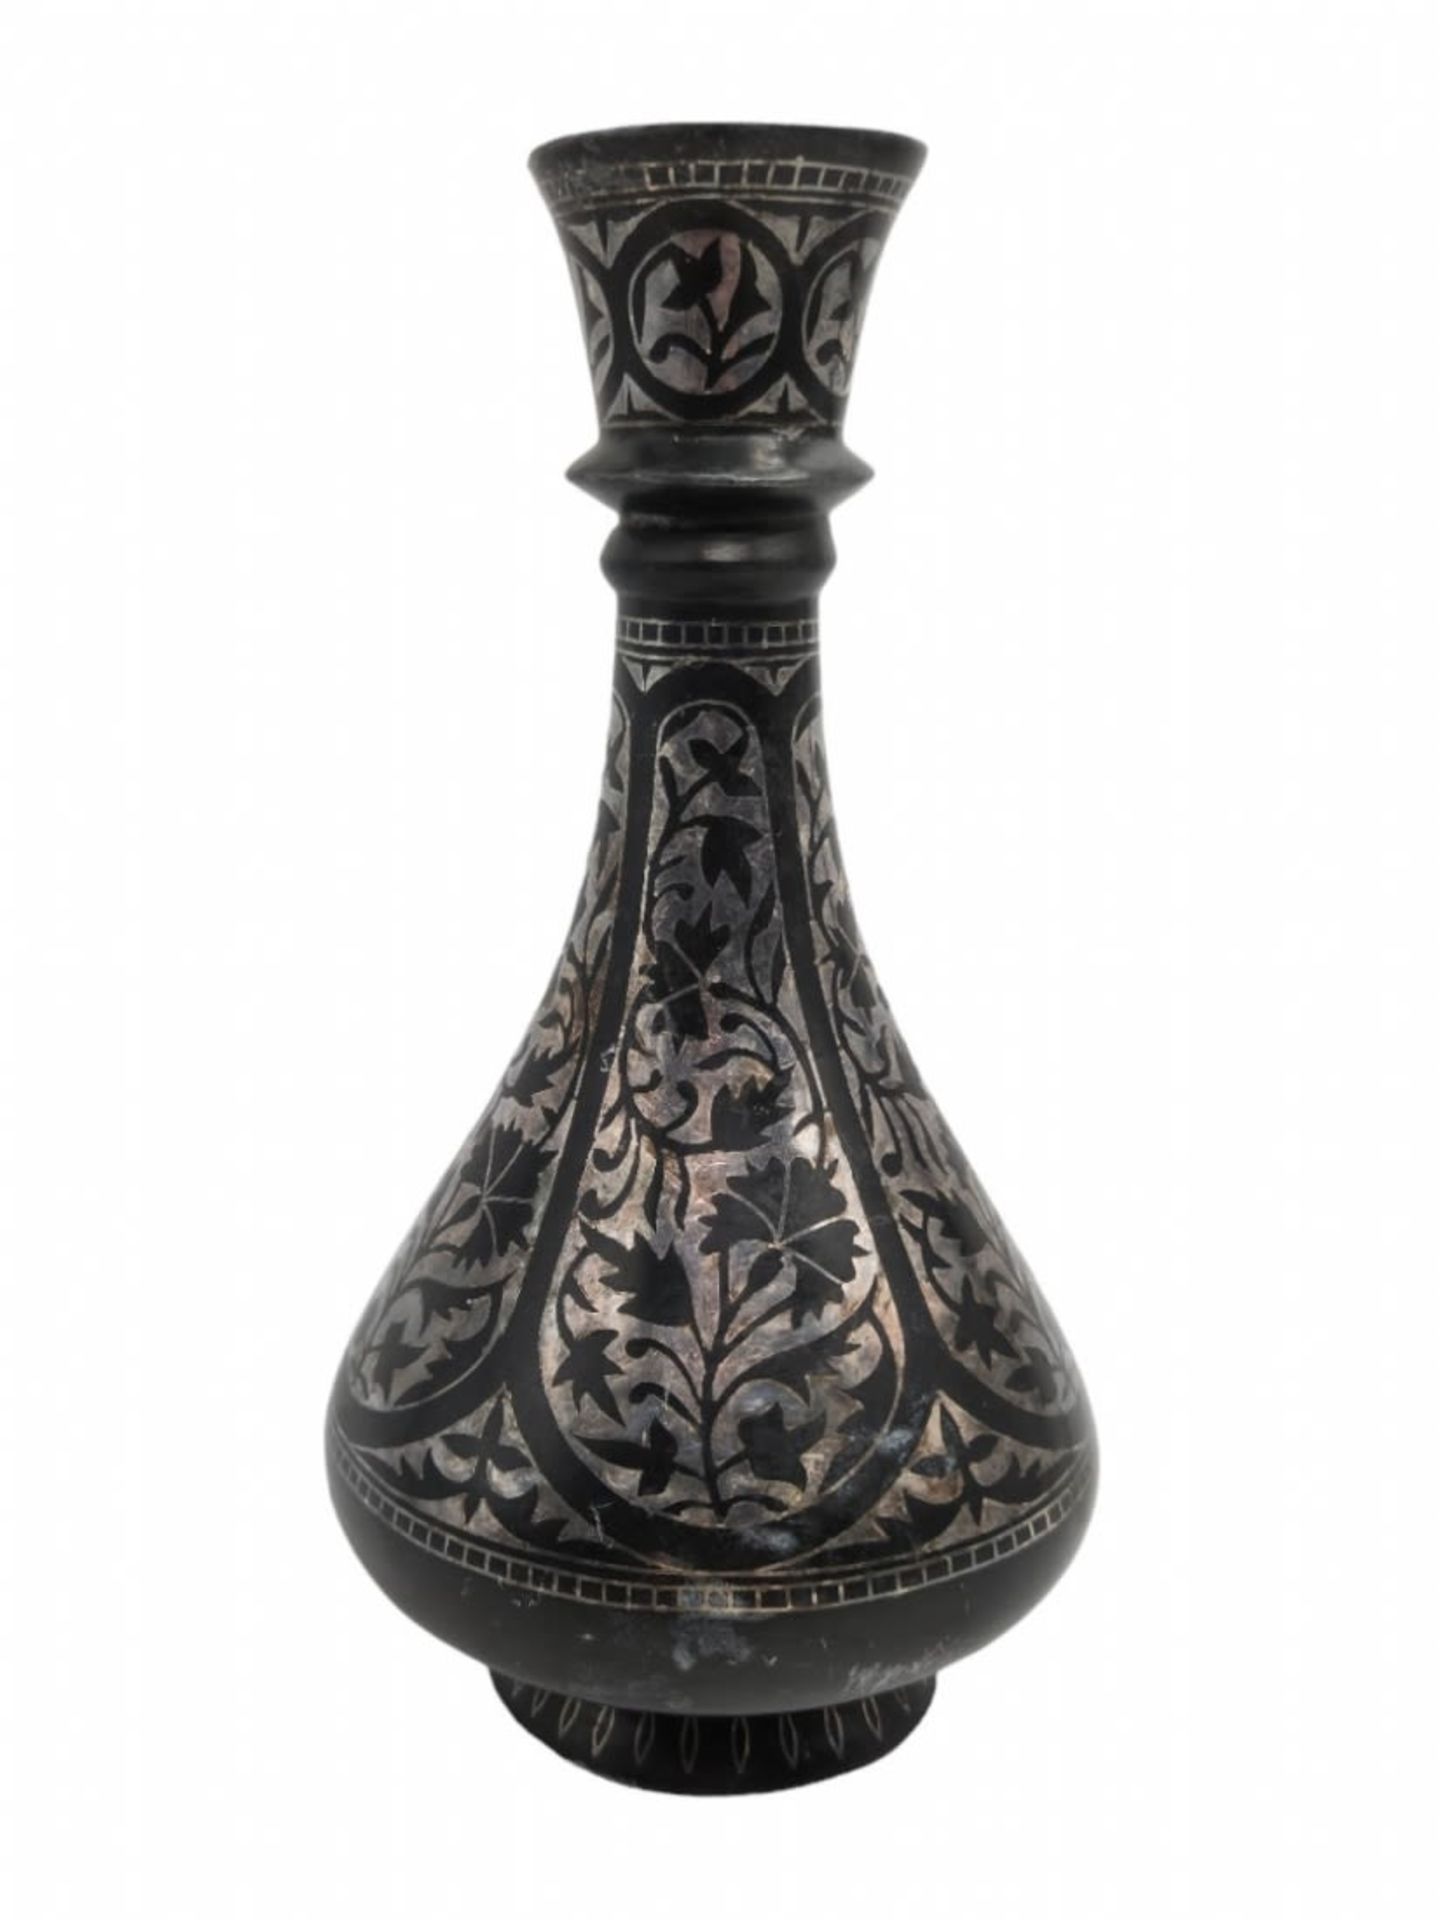 An antique Indian Bidri vase, made of metal inlaid with silver, second half of the 19th century,